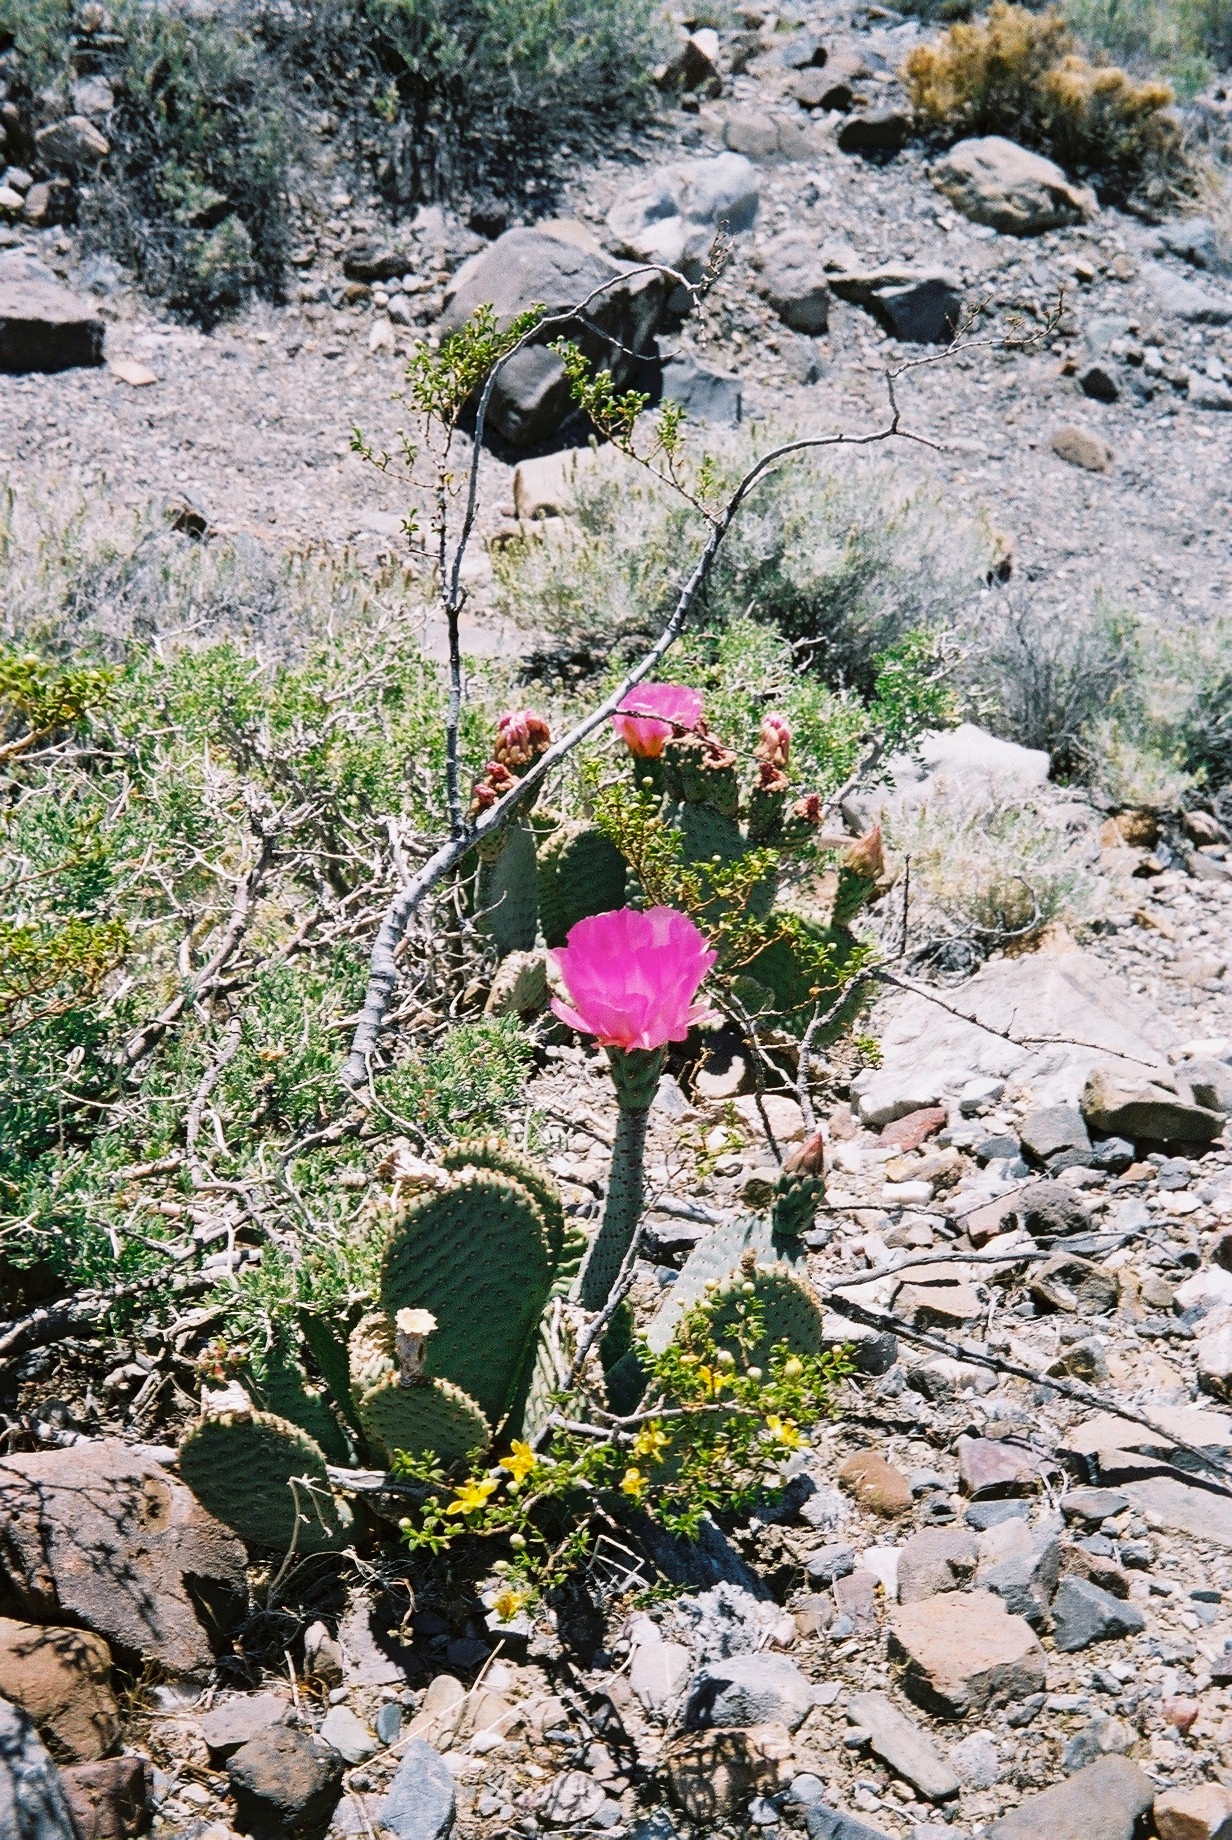 A Beavertail Cactus in pink bloom, Death Valley.